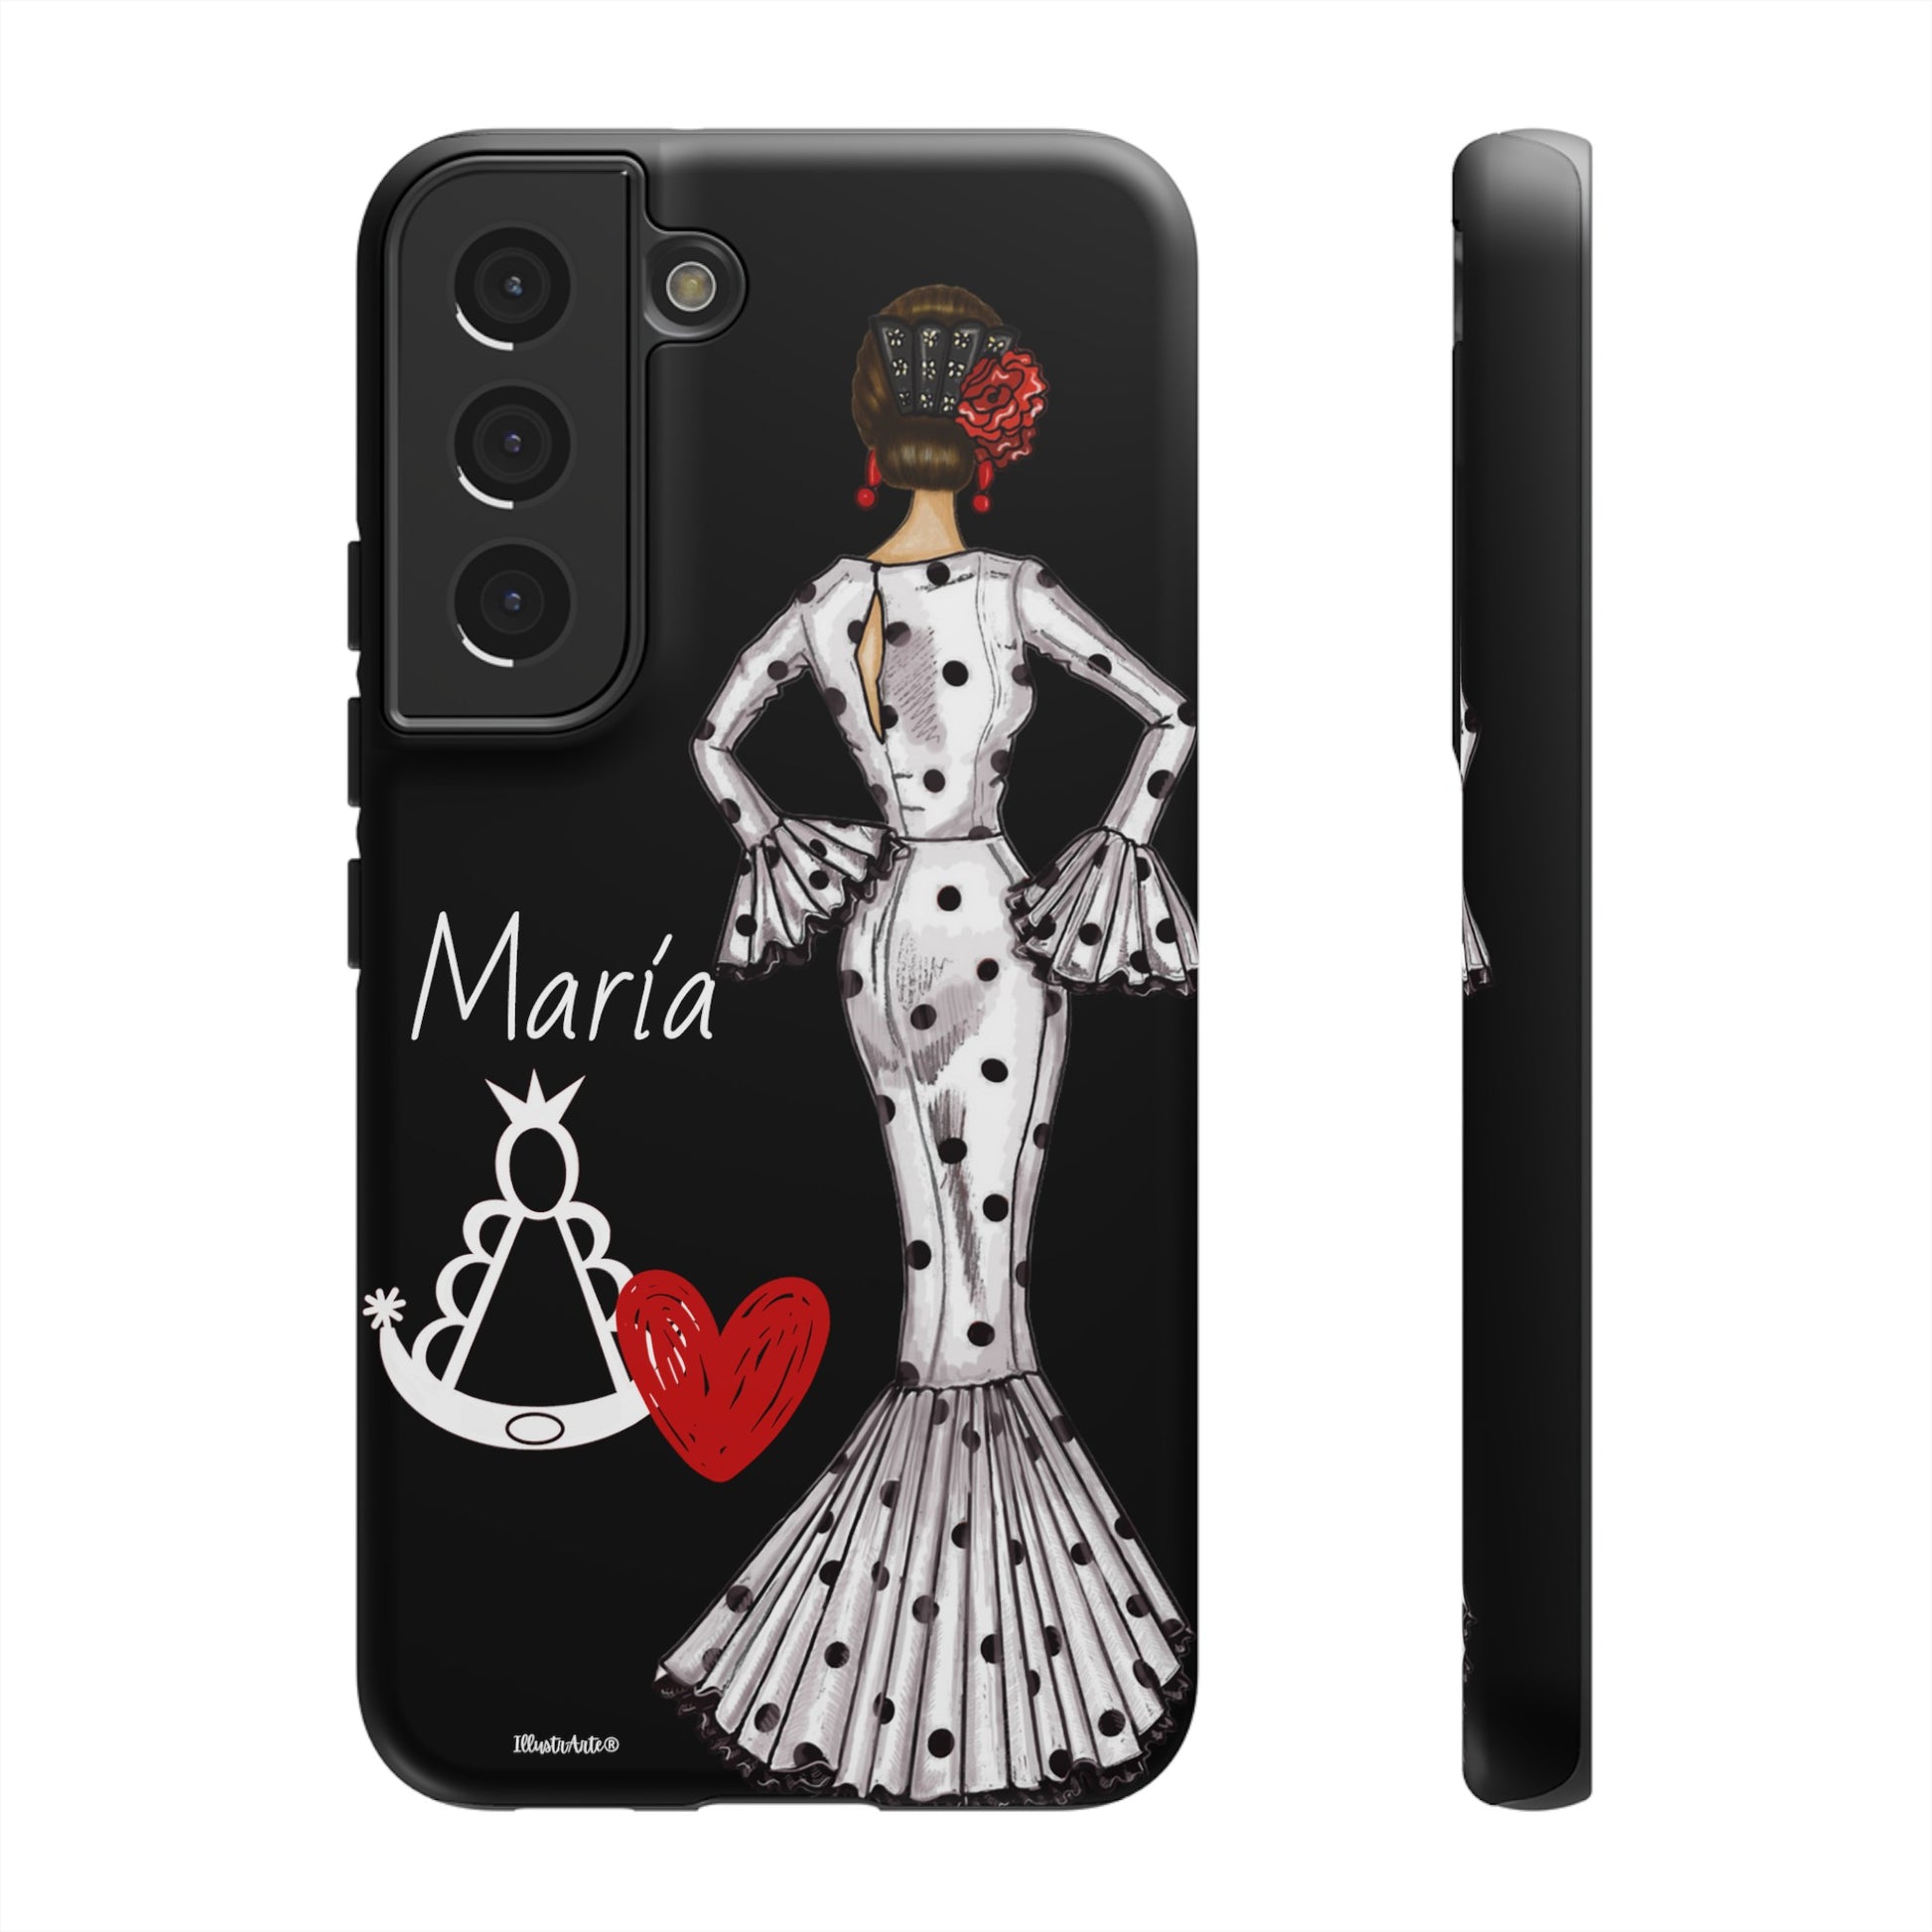 a cell phone case with a woman in a polka dot dress